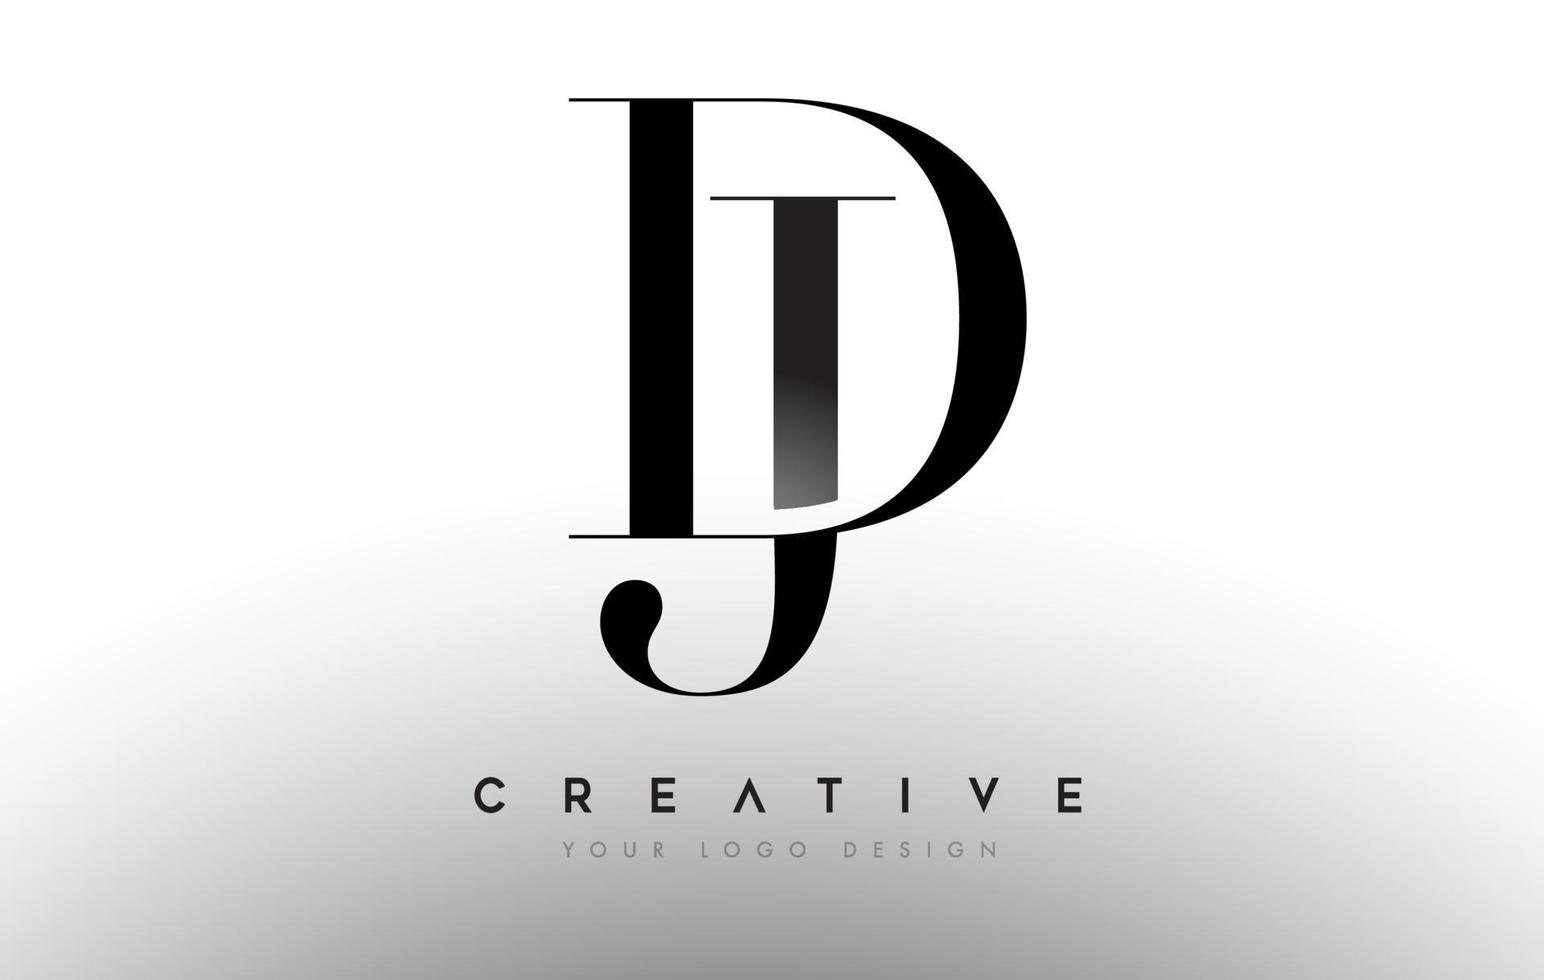 DJ dj letter design logo logotype icon concept with serif font and classic elegant style look vector